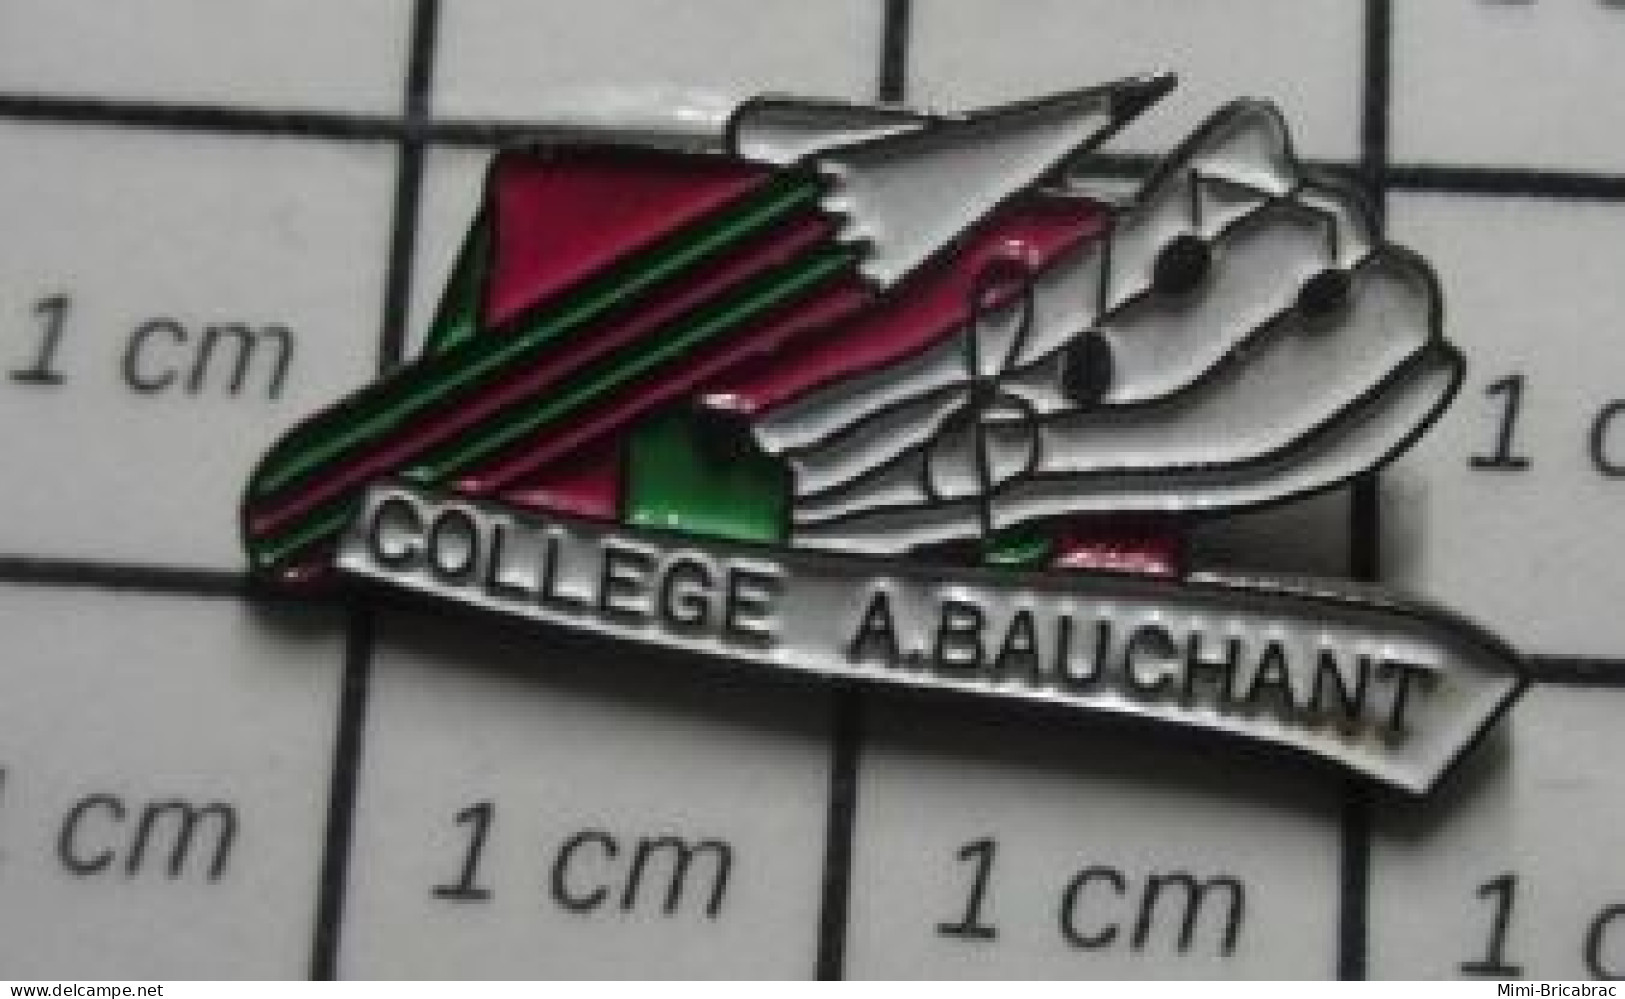 3517 Pin's Pins / Beau Et Rare / ADMINISTRATIONS / COLLEGE A BAUCHANT CRAYON PORTEE MUSICALE - Administrations